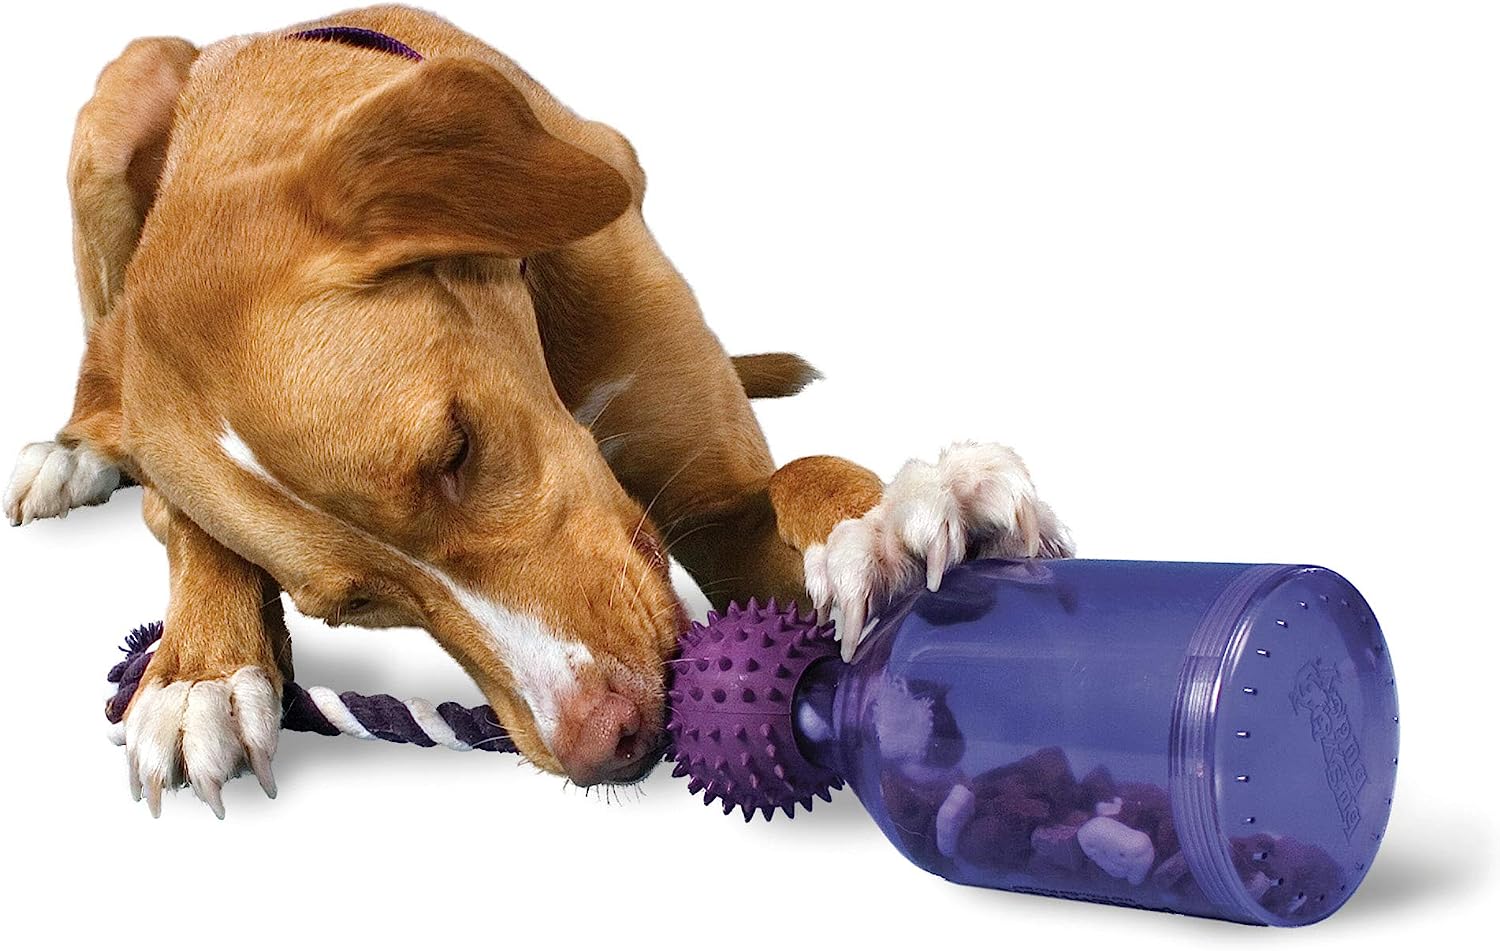 ANYPET Dog Planet Interactive Toy Puzzle IQ Treat Ball, Food Dispensing  Chew Toys for Medium to Large Dogs 